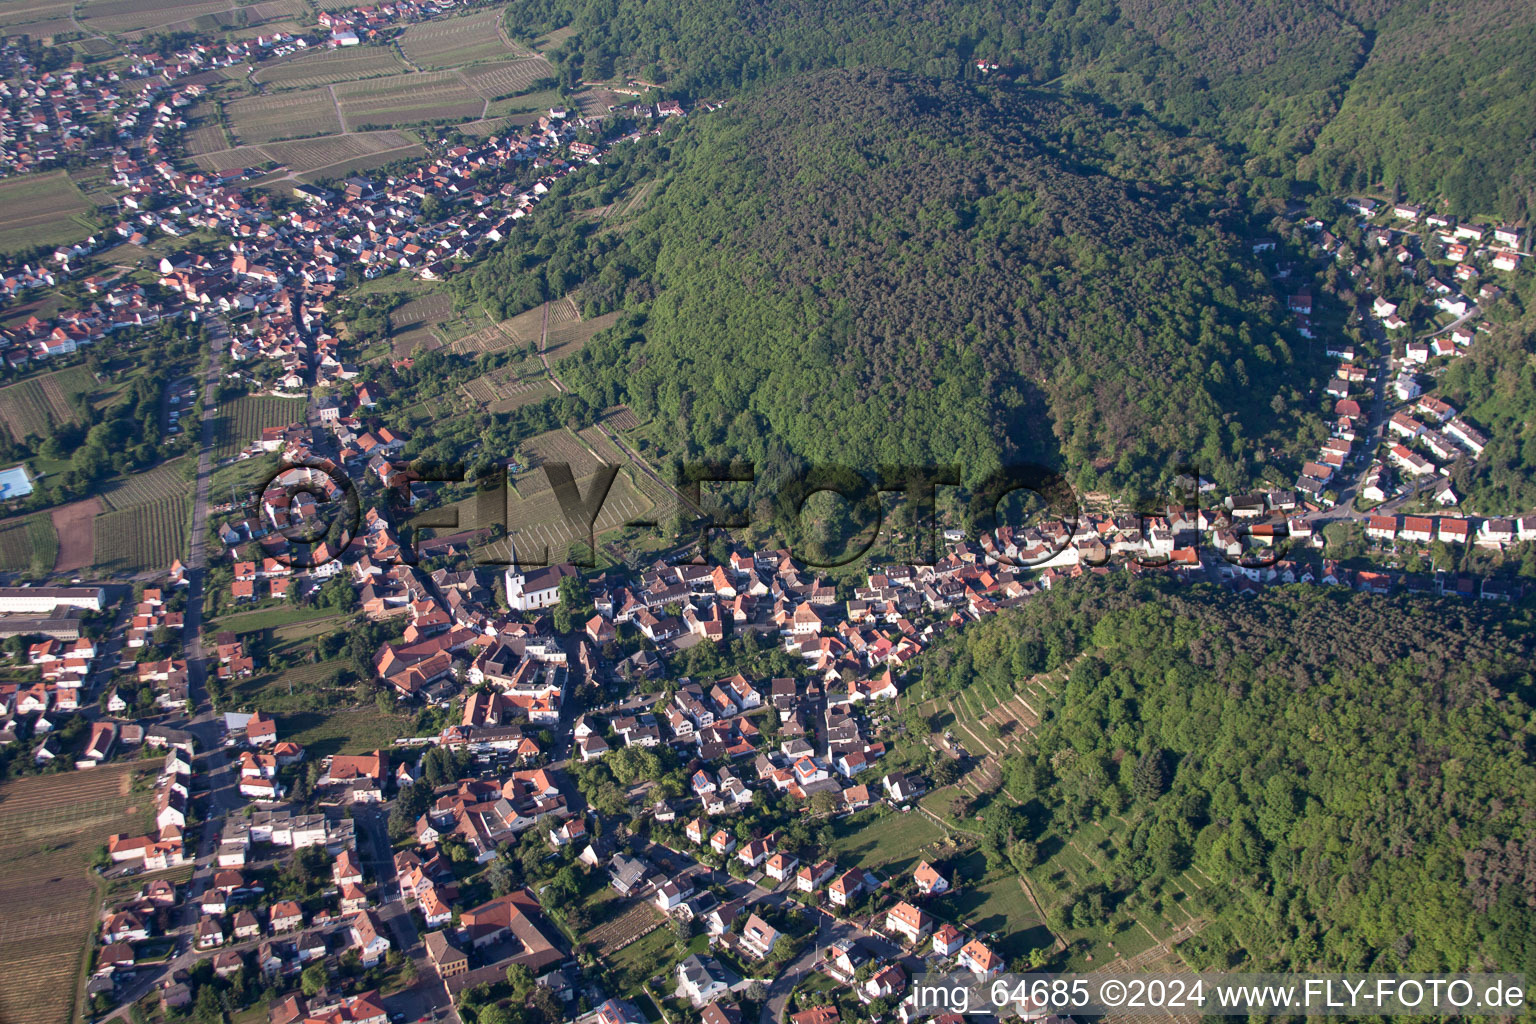 Aerial photograpy of Village - view on the edge of wine yards in the district Hambach in Neustadt an der Weinstrasse in the state Rhineland-Palatinate, Germany